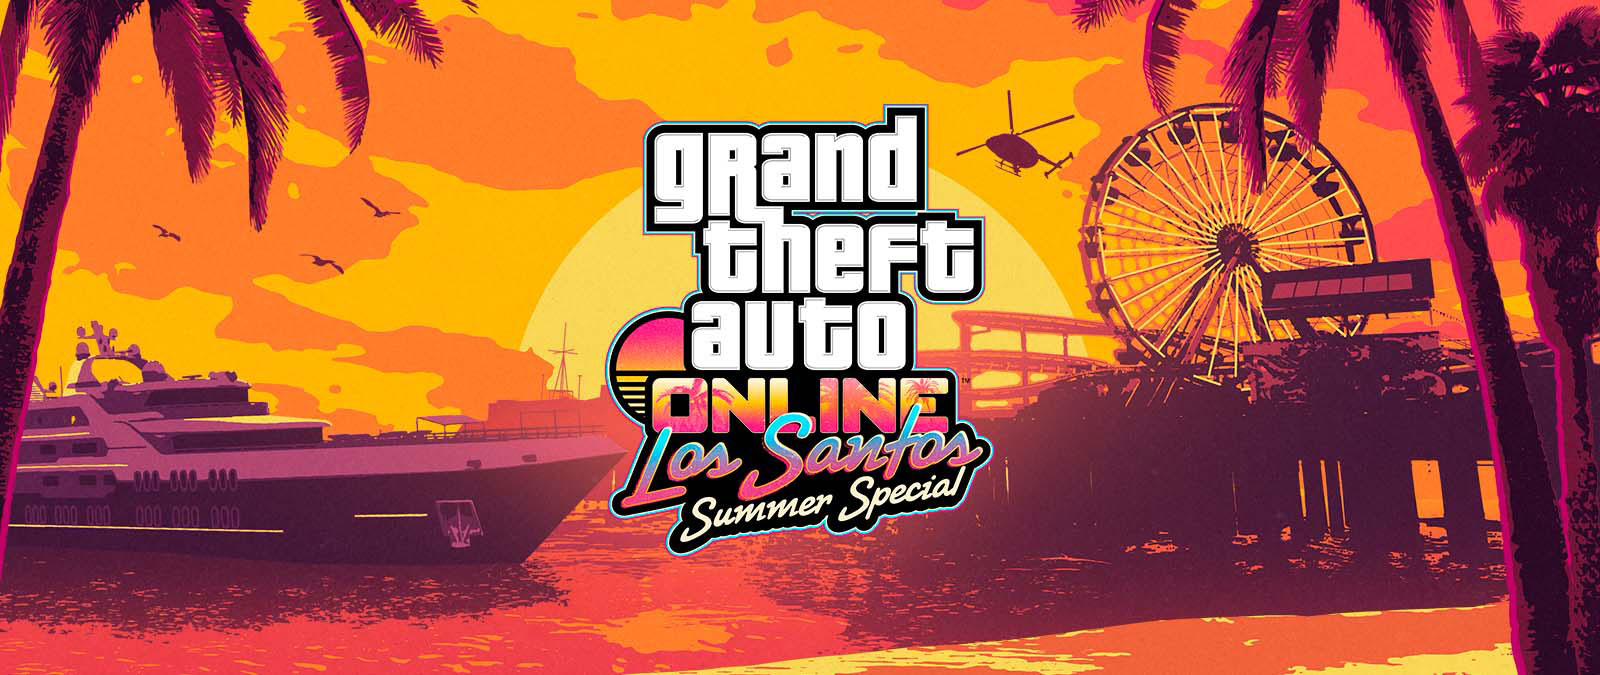 Grand Theft Auto Online. Los Santos Summer Special. A yacht, a Ferris wheel and a helicopter at sunset